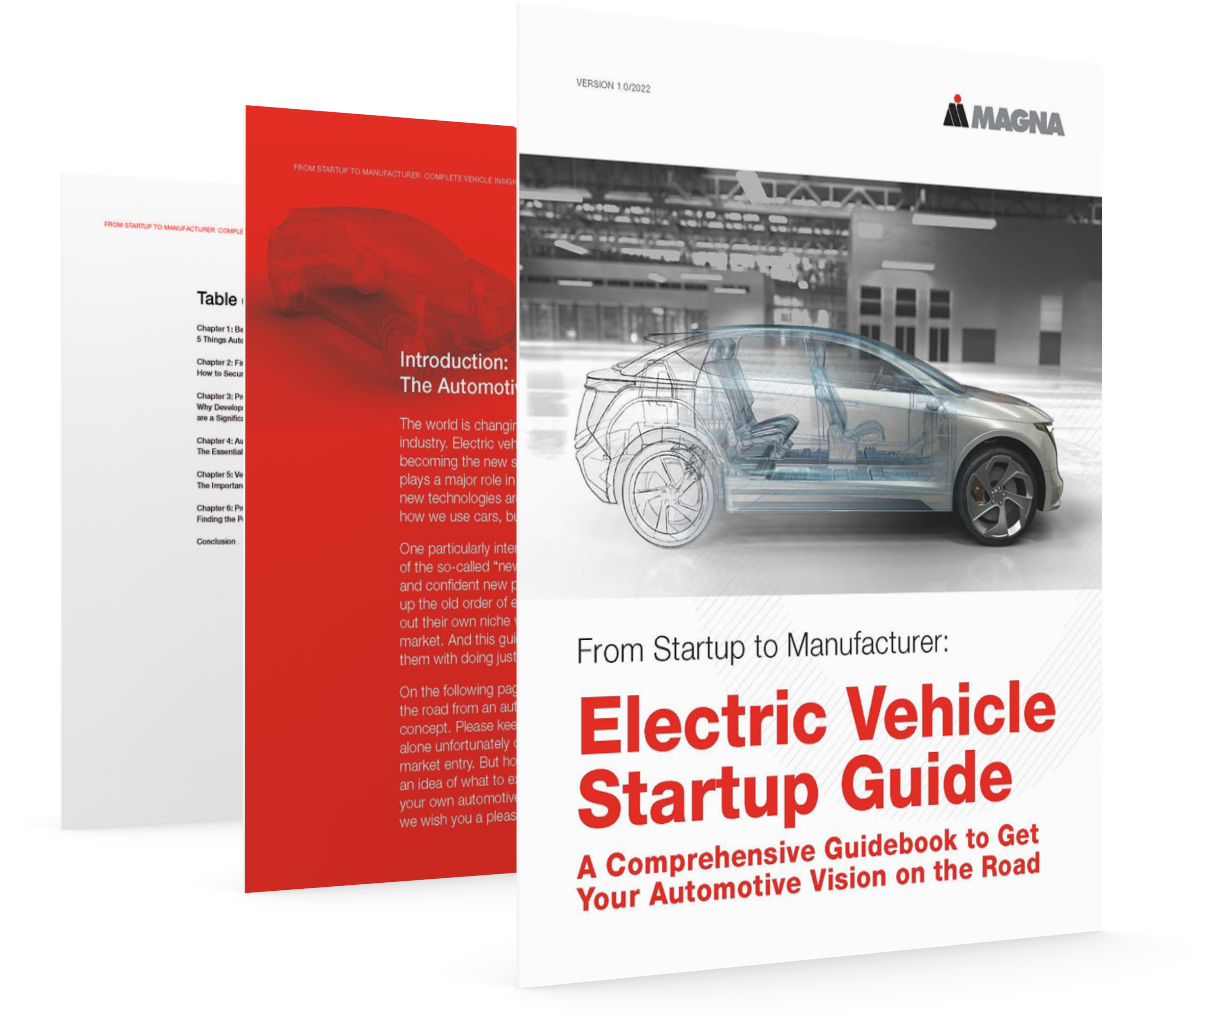 Whitepaper from Magna: Electrical Vehicle Startup Guide